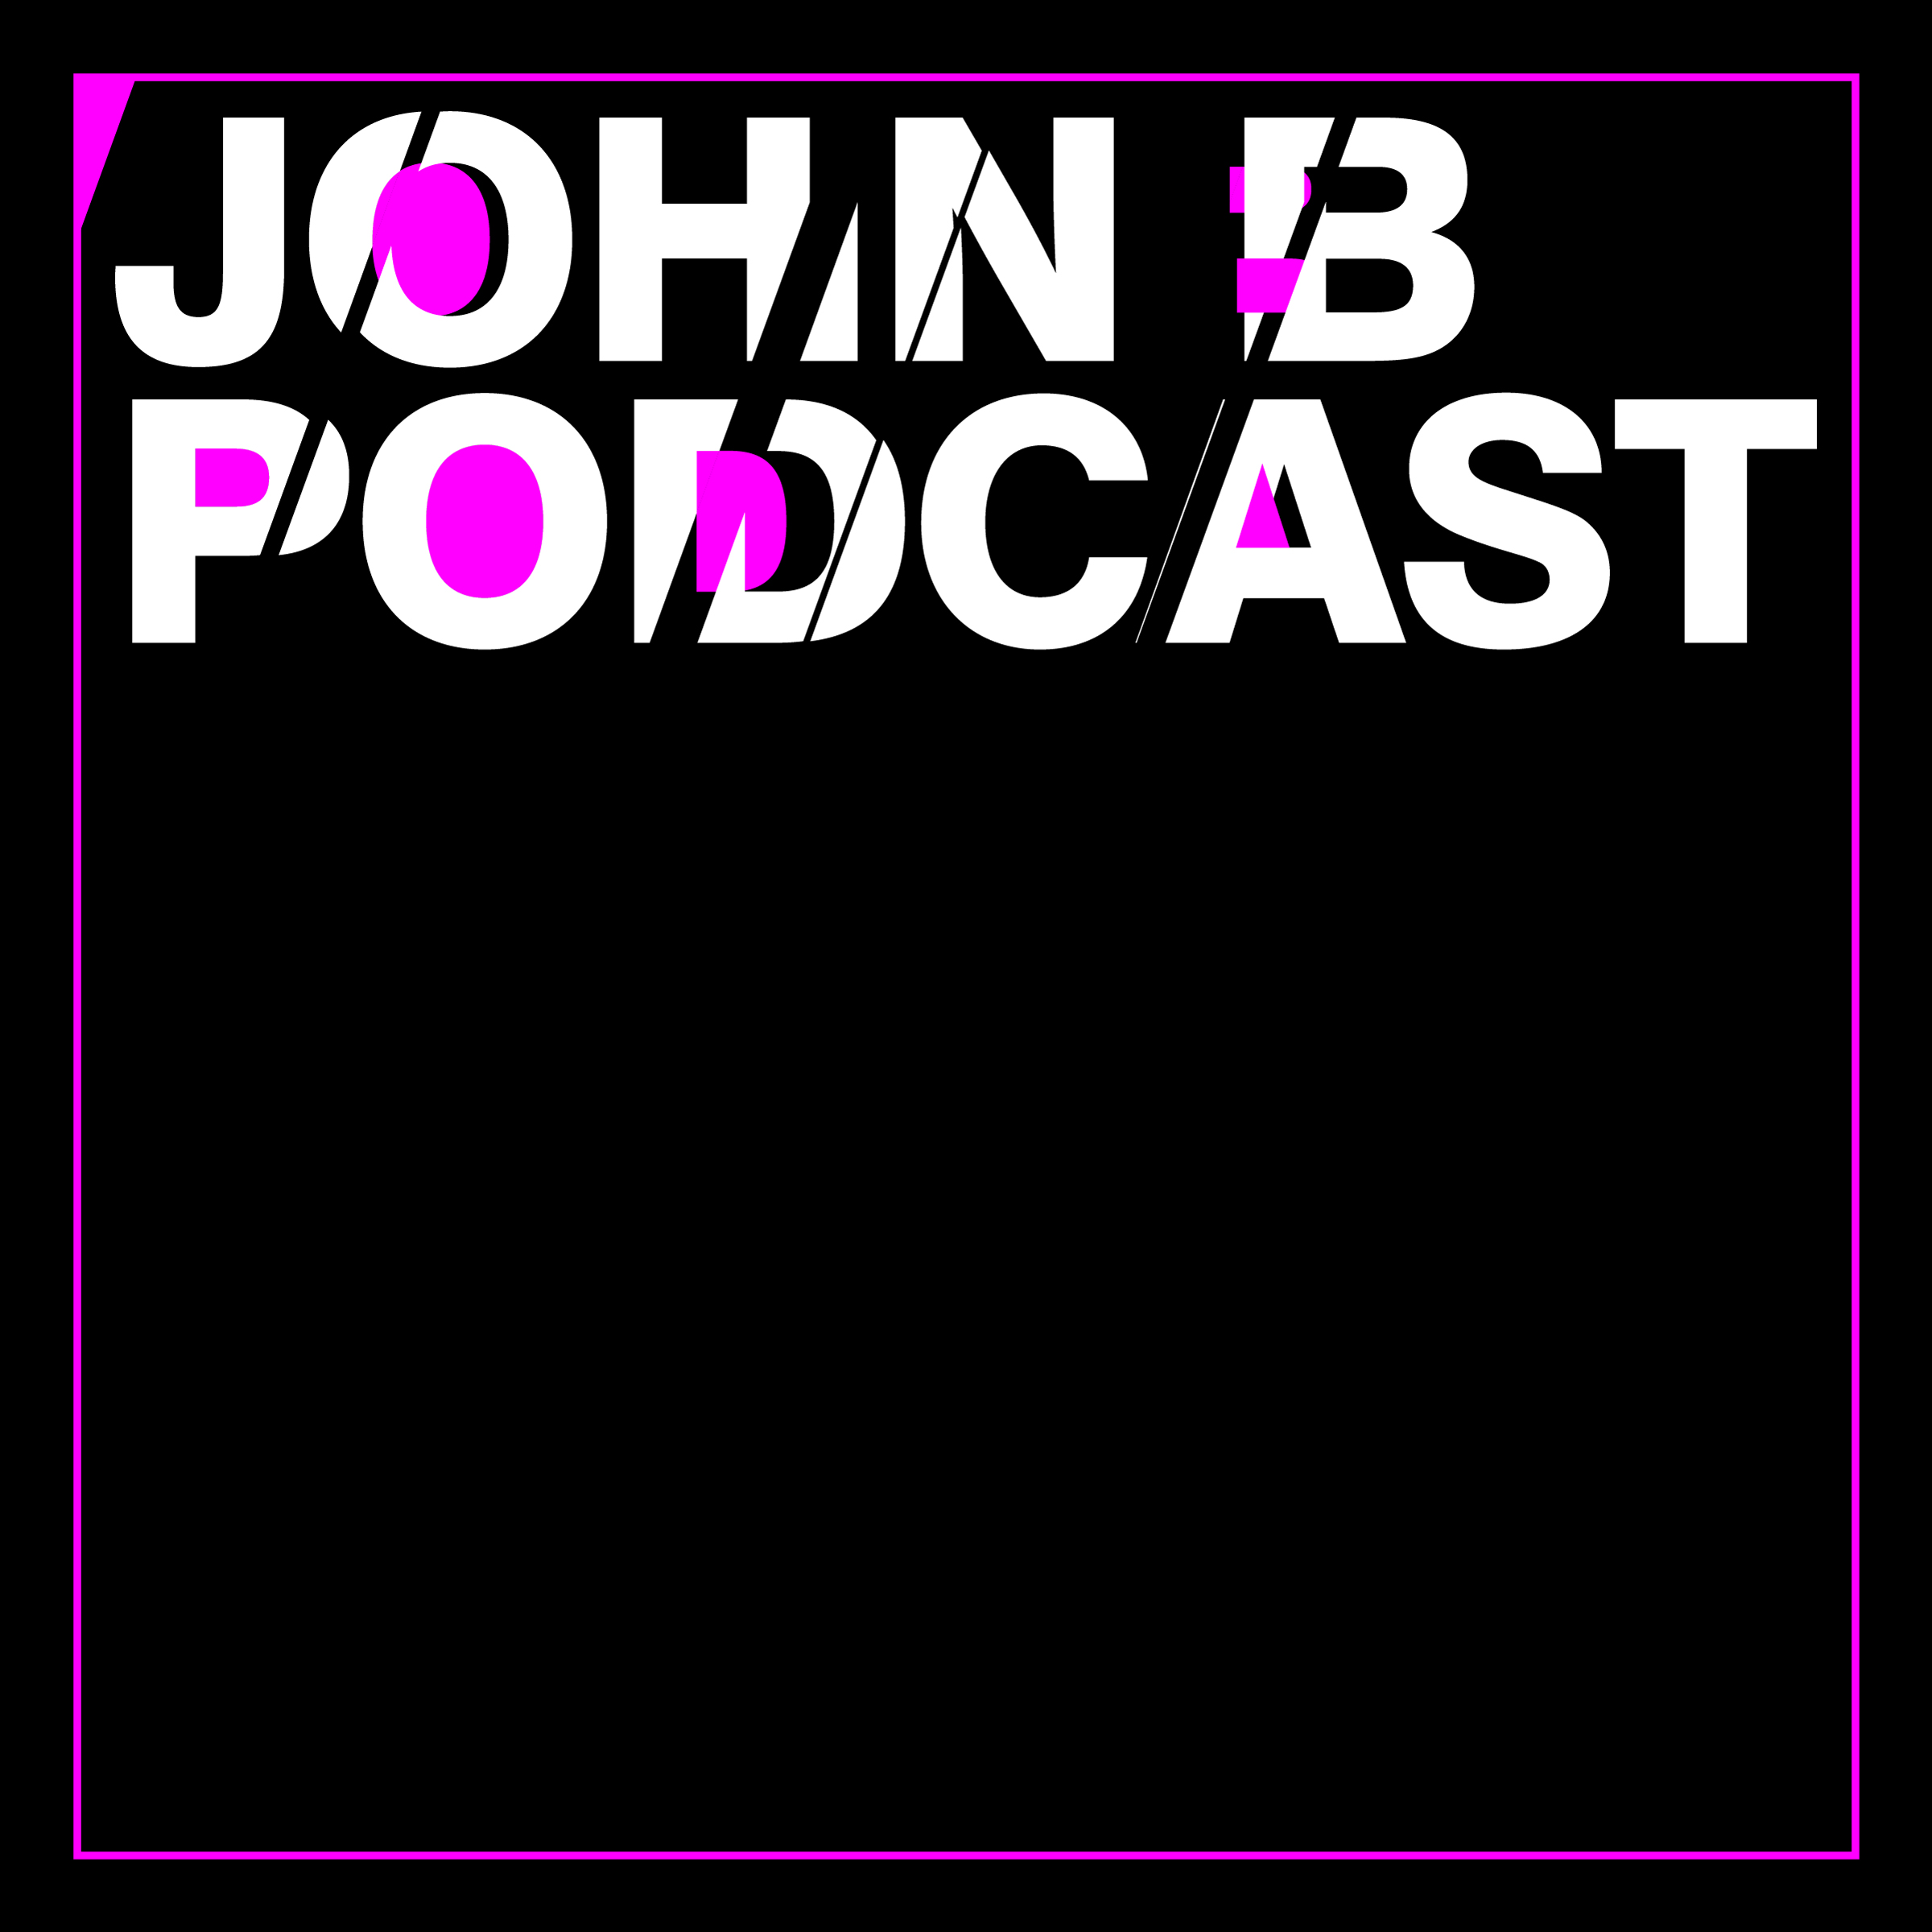 The John B Drum & Bass Podcast Cover